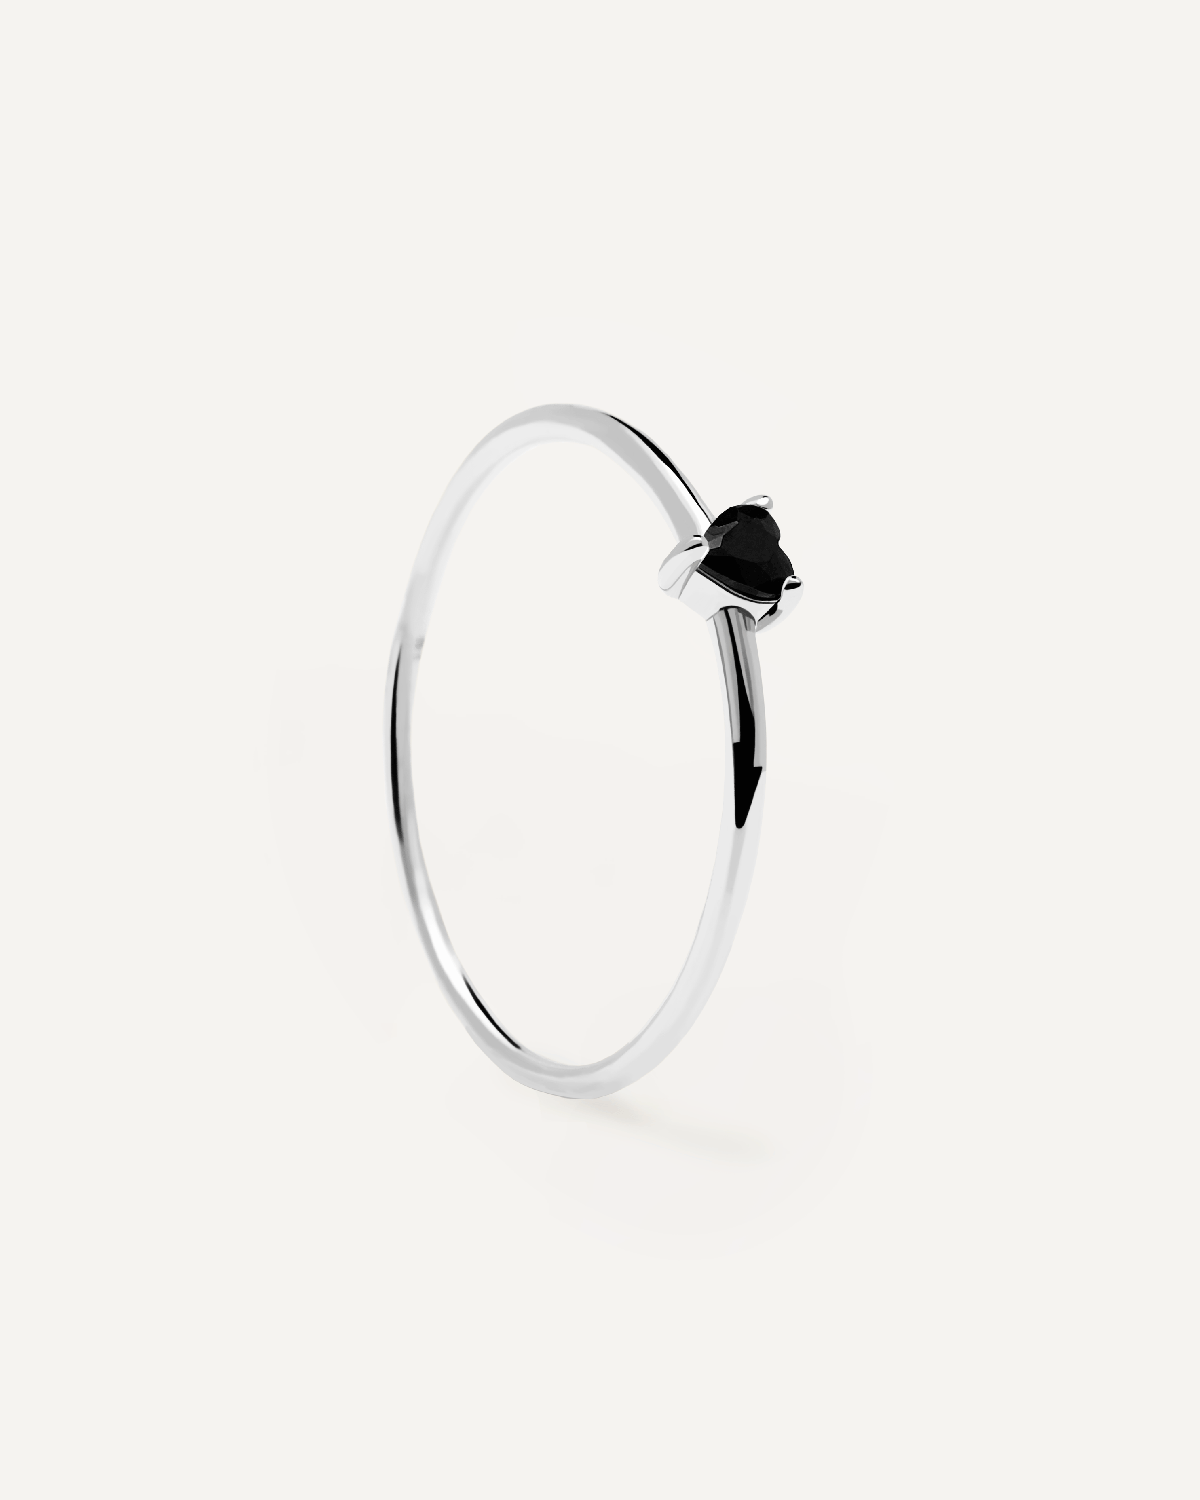 2024 Selection | Black Heart Ring Silver. Heart-shaped black zirconia stone prong-set on a thin 925 sterling silver ring. Get the latest arrival from PDPAOLA. Place your order safely and get this Best Seller. Free Shipping.